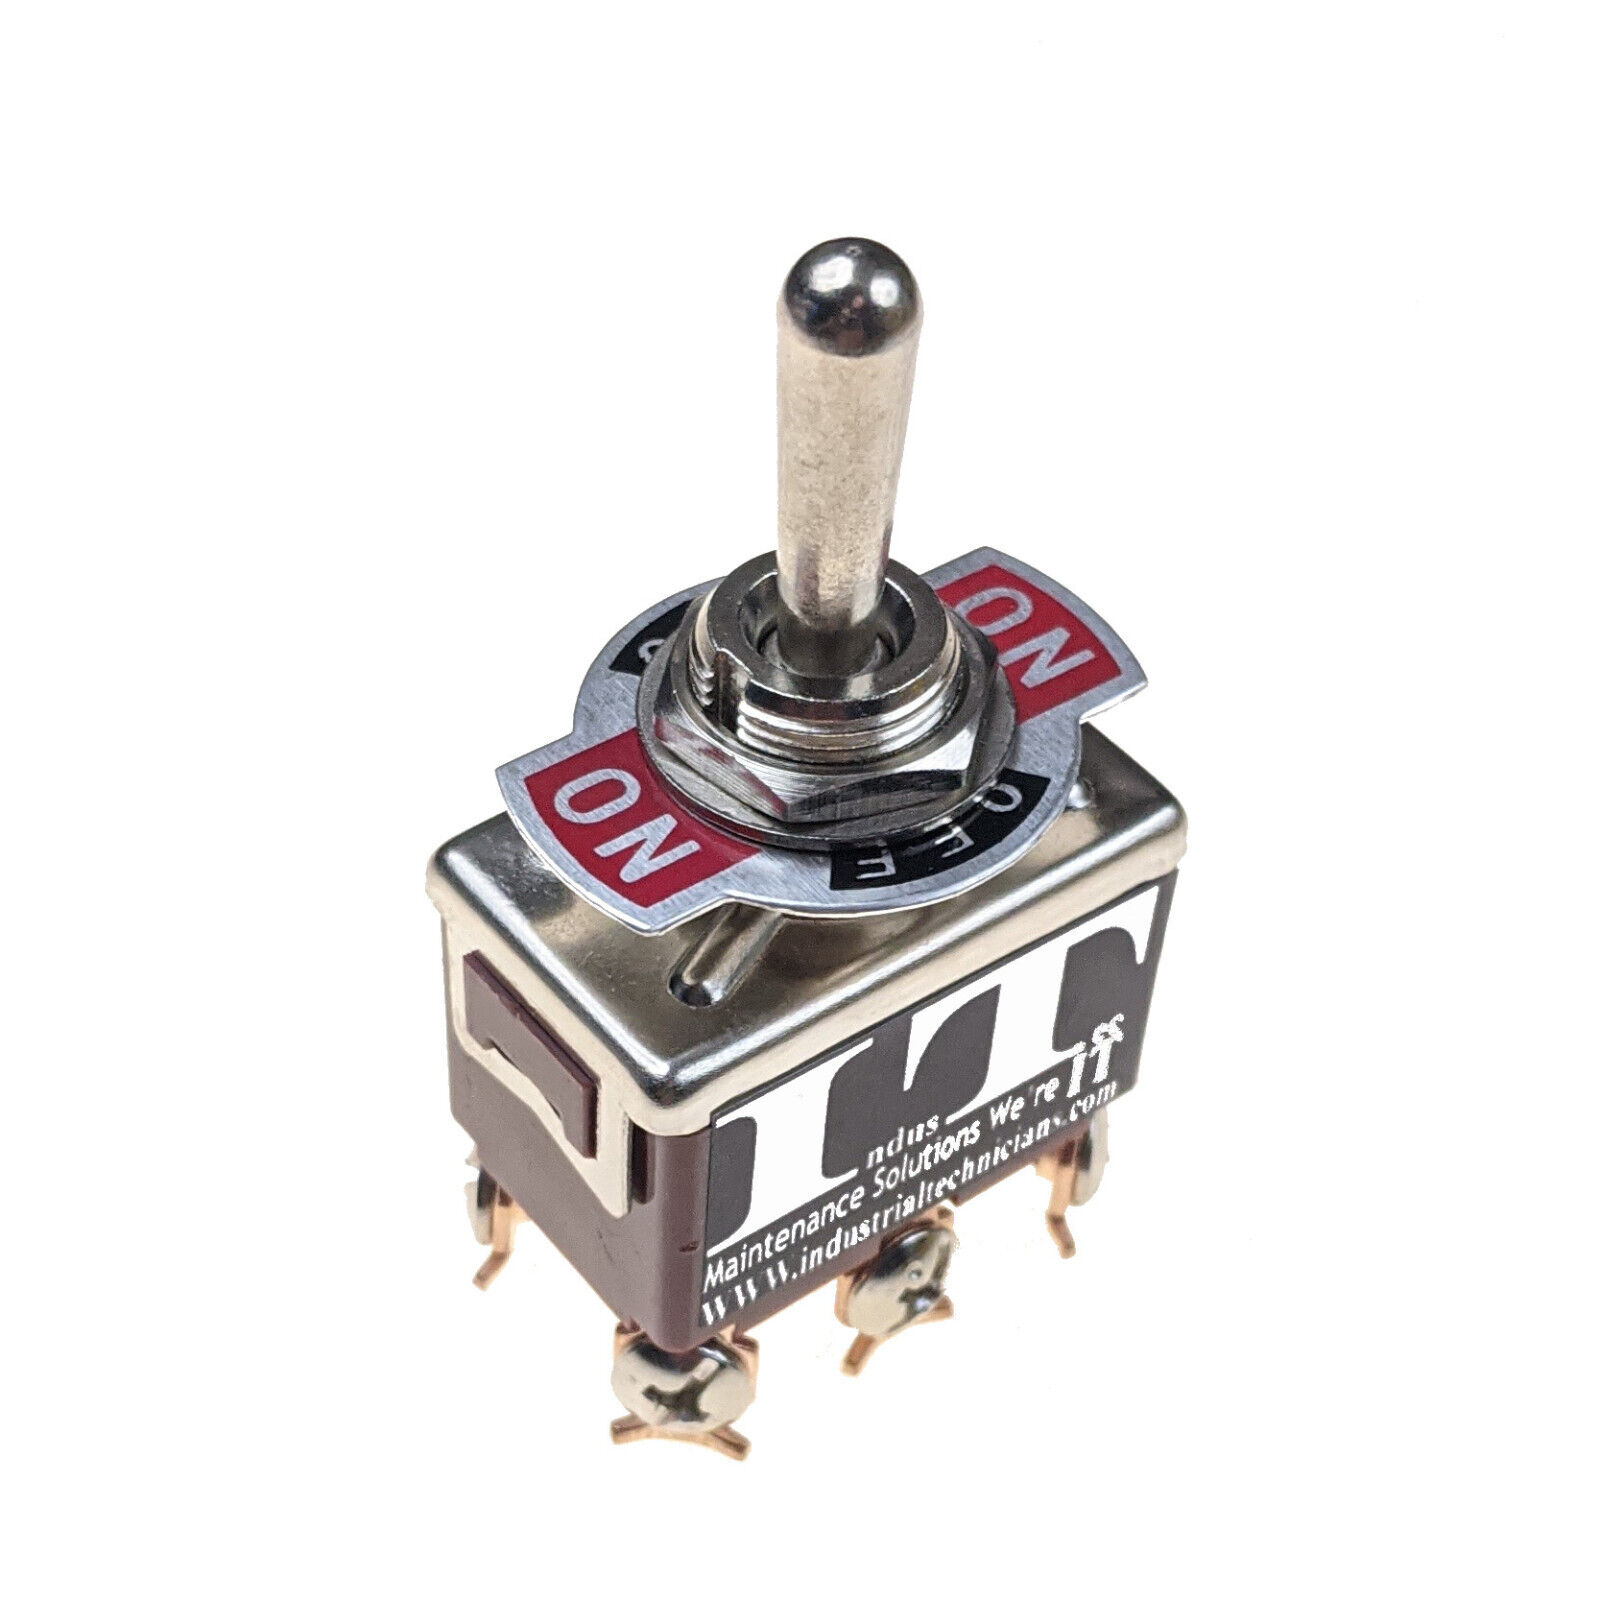 IndusTec 20A 125V DPDT 6 screws (On)/Off/(On) Toggle Switch Momentary 3 Pos 12V